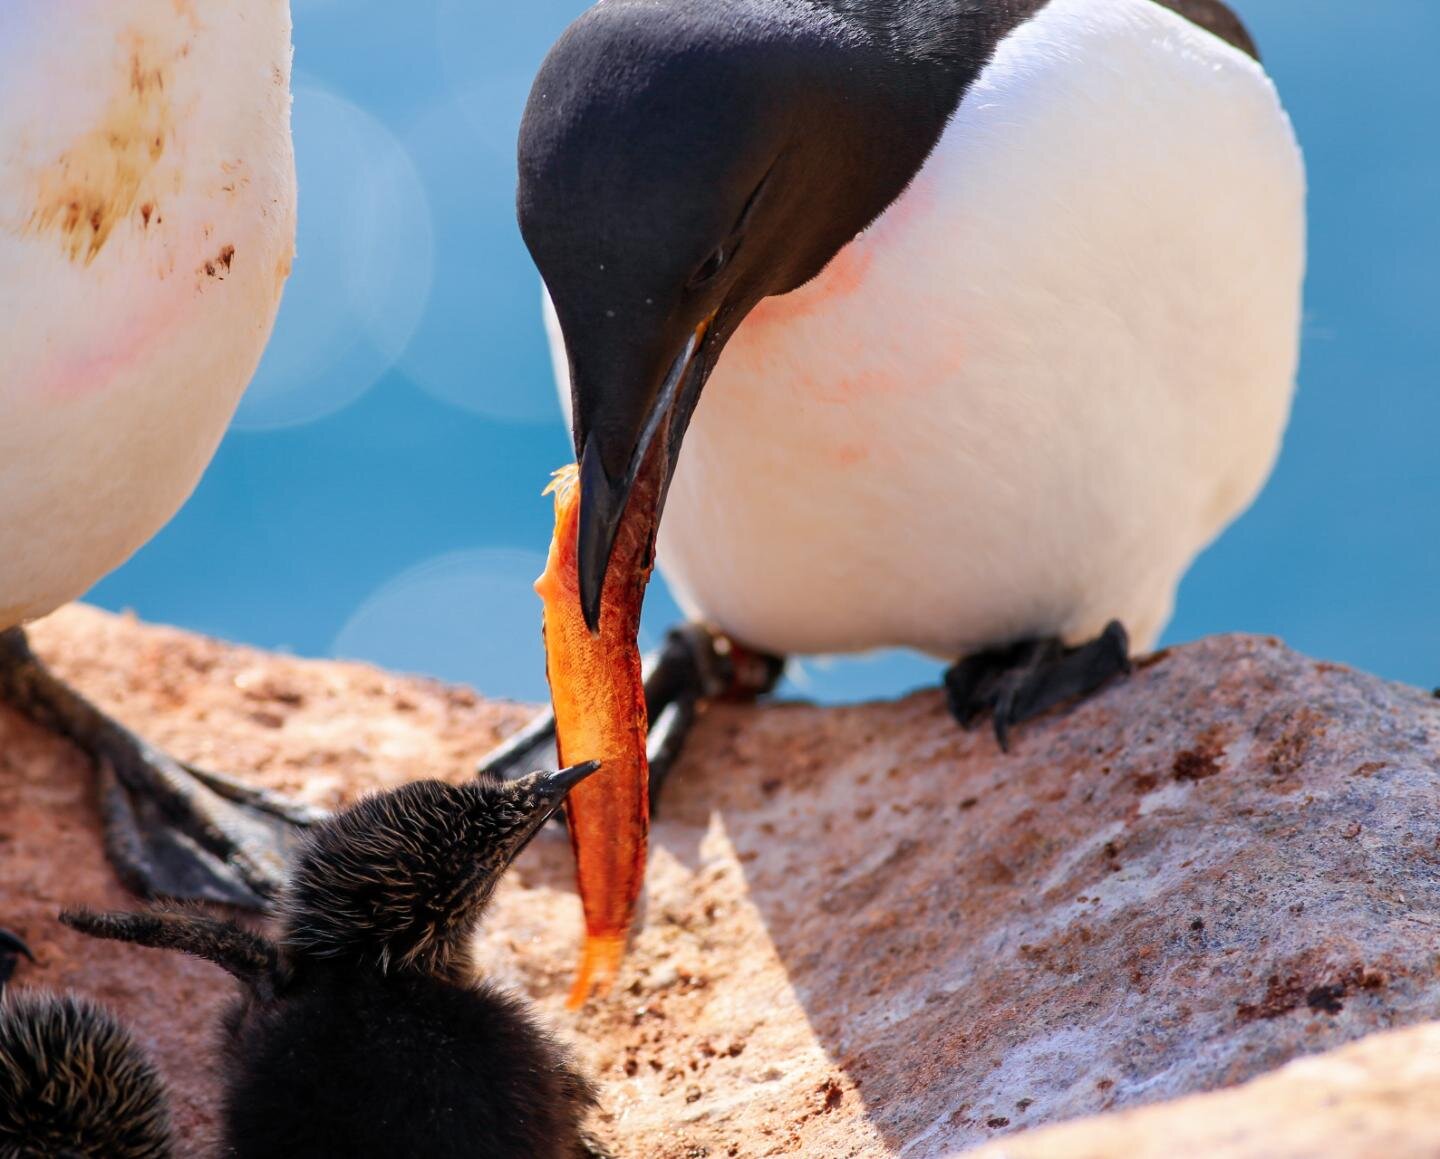 Arctic seabirds are less heat tolerant, more vulnerable to climate change